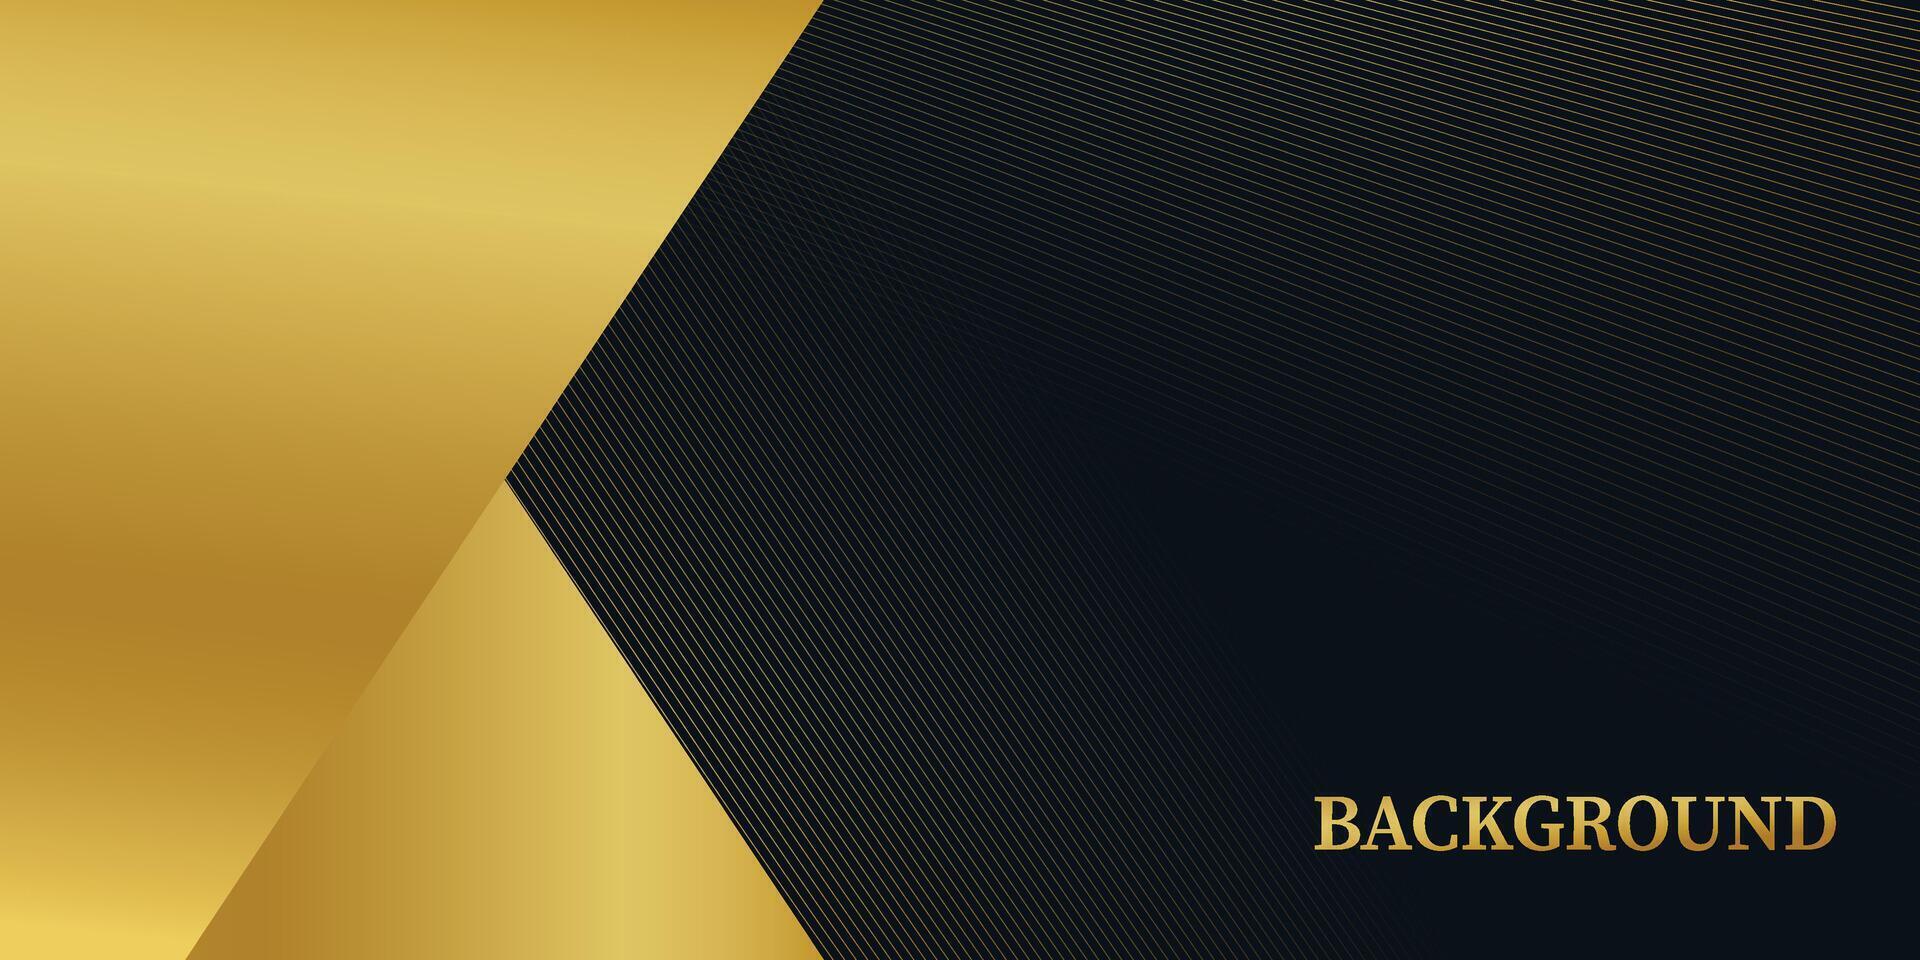 black and gold  background. Vector horizontal template for digital lux business banner, contemporary formal invitation, luxury voucher, prestigious gift certificate